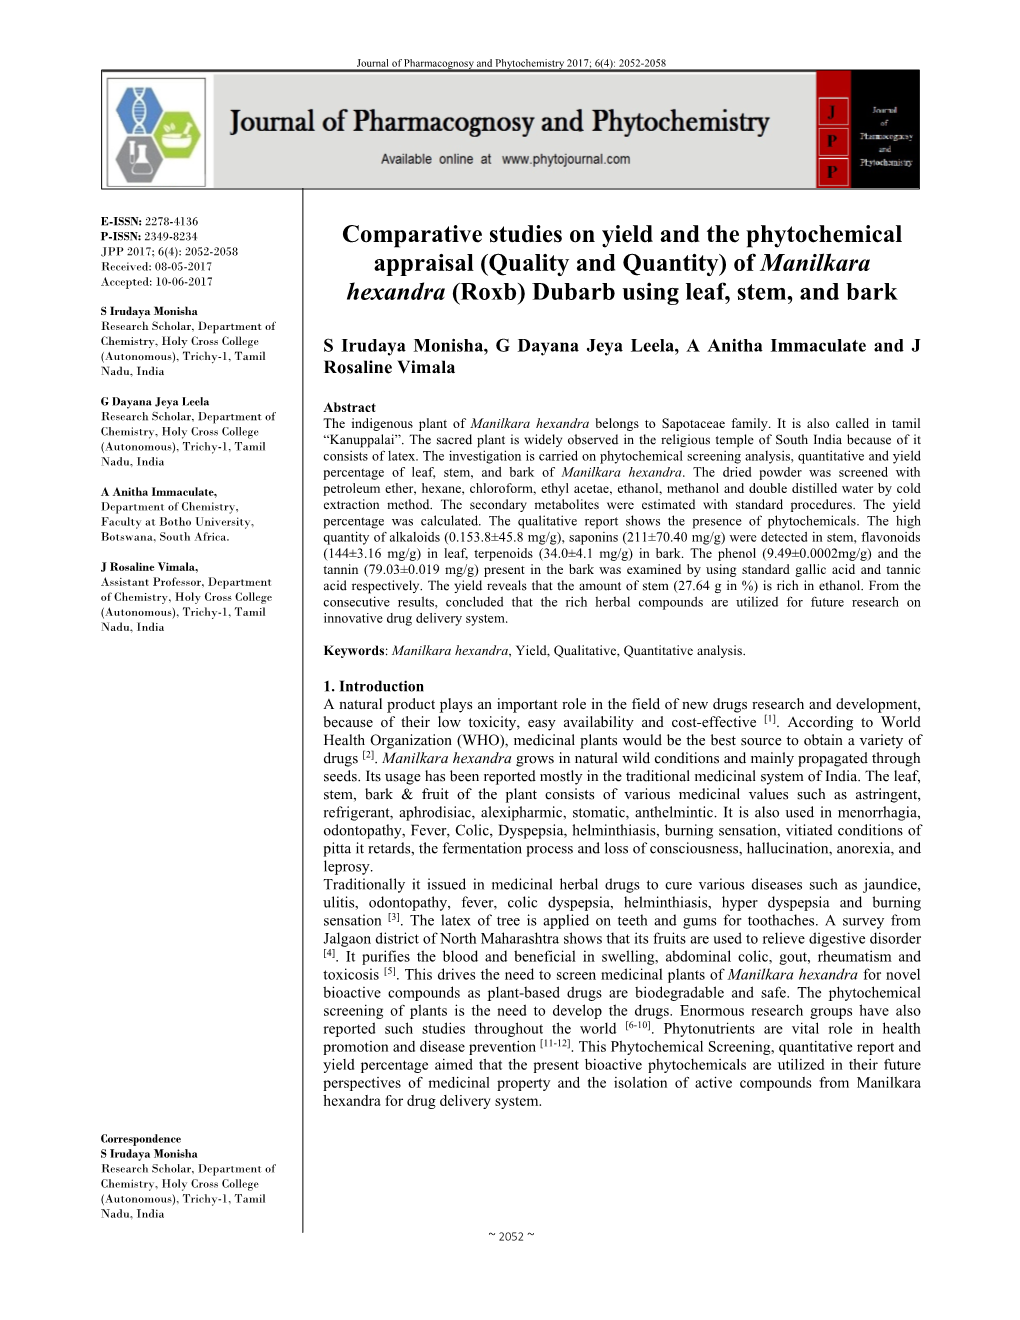 Comparative Studies on Yield and the Phytochemical Appraisal (Quality and Quantity) of Manilkara Hexandra (Roxb) Dubarb Using Le